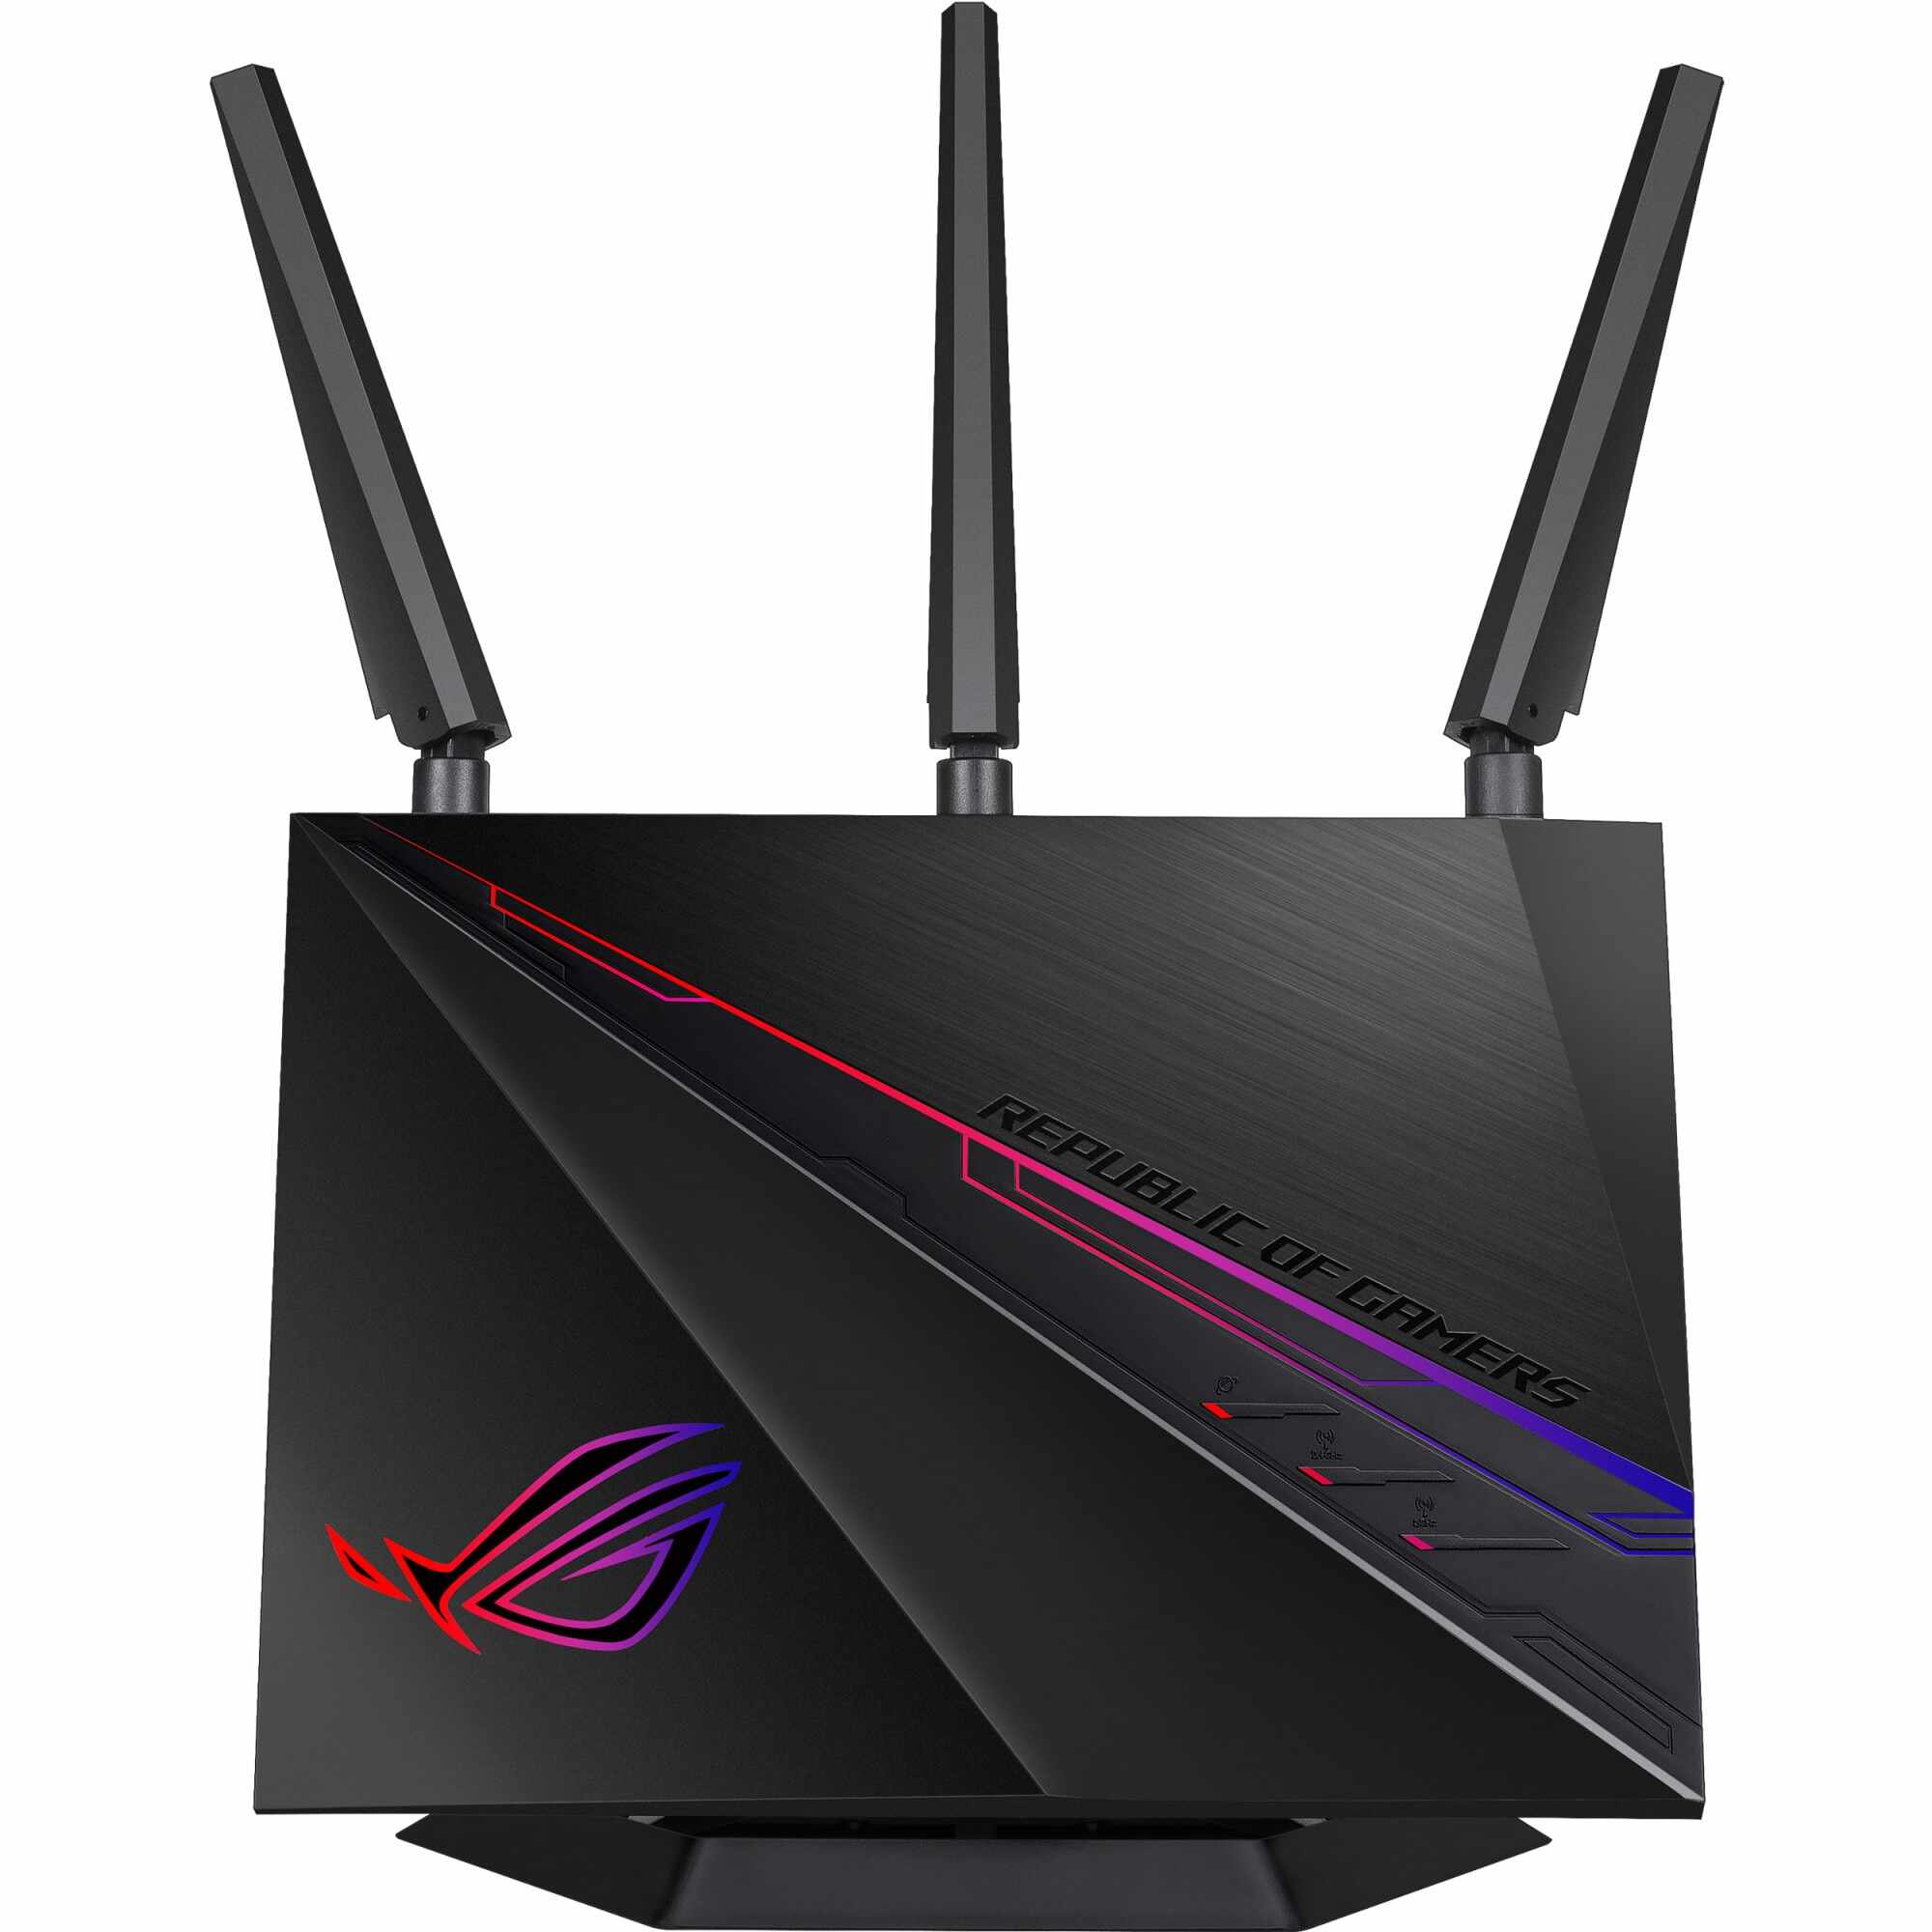 ASUS ROG Rapture GT-AC2900 WiFi Gaming Router, NVIDIA GeForce NOW Recommended, Triple Level Game Acceleration, Easy Port Forwarding, AiMesh WiFi System, Life-time Free Network Security